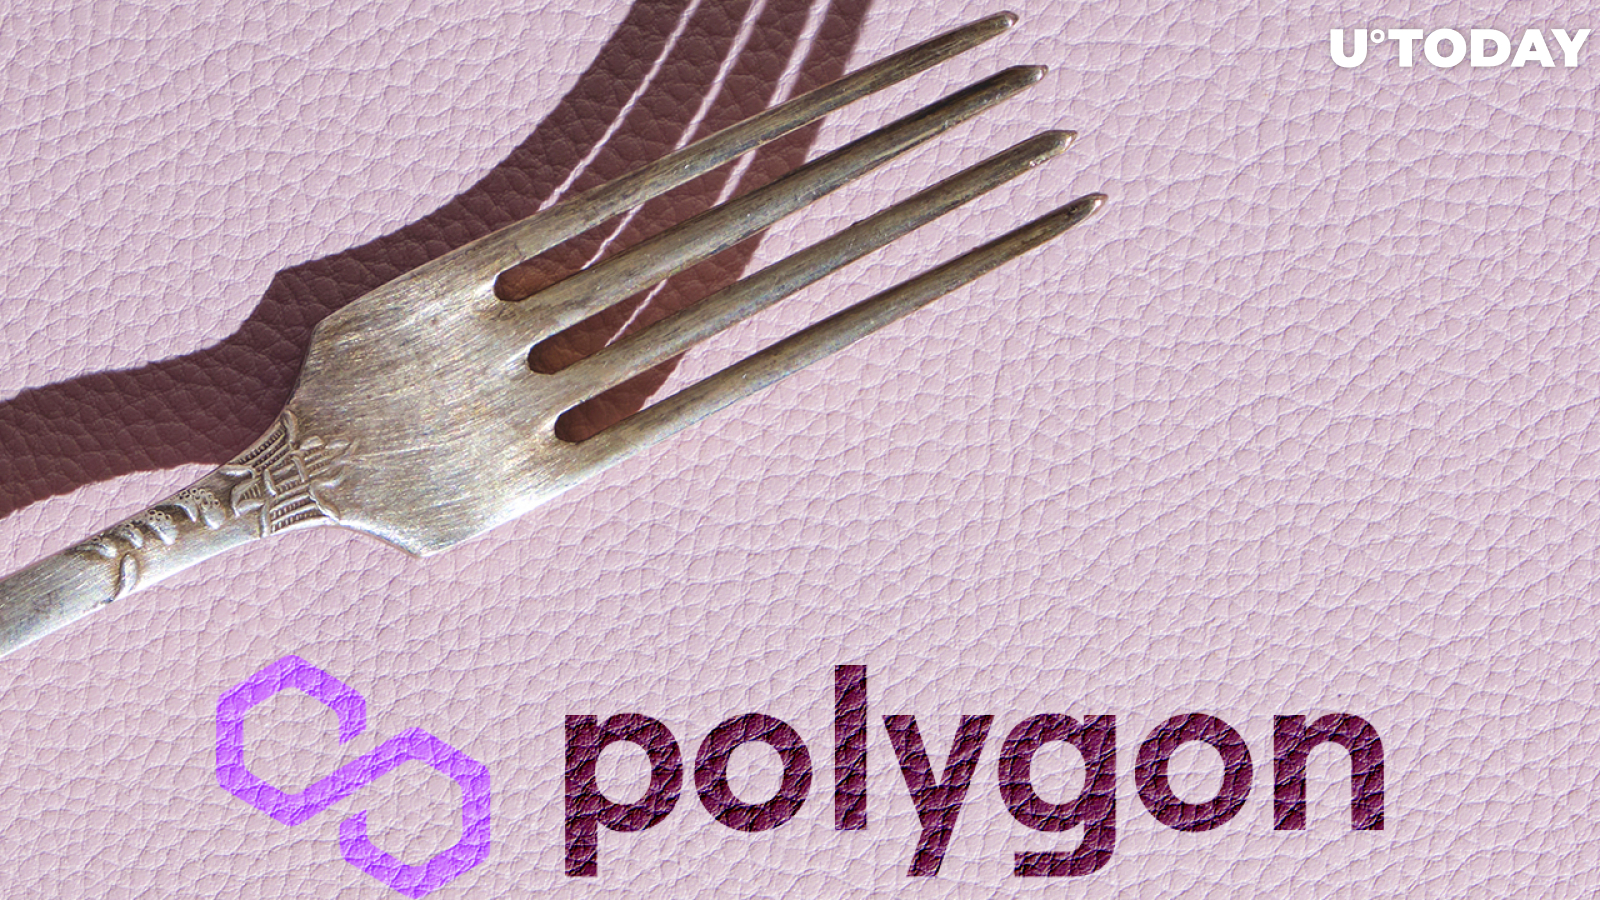 Polygon's London Hard Fork Arrives as Network Declares Date for Mainnet Launch